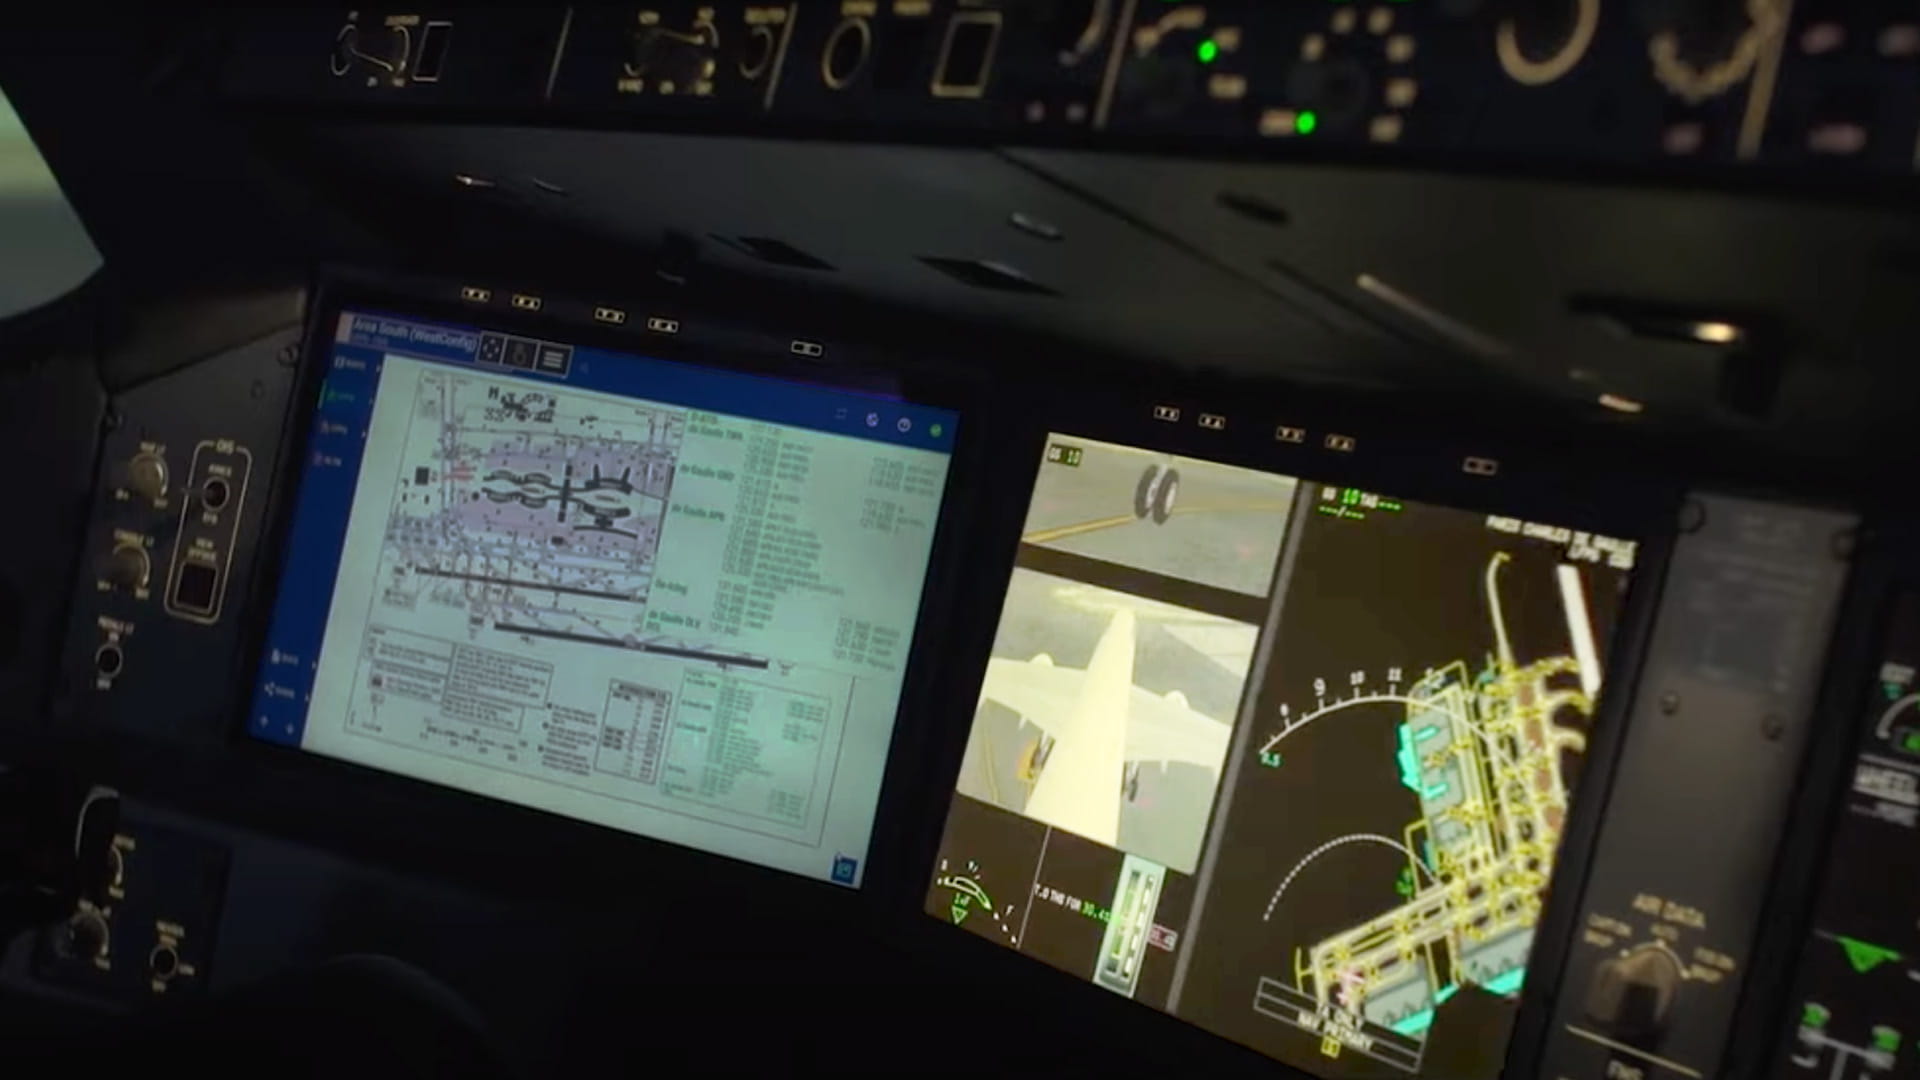 Video displays showing aircraft taxi data